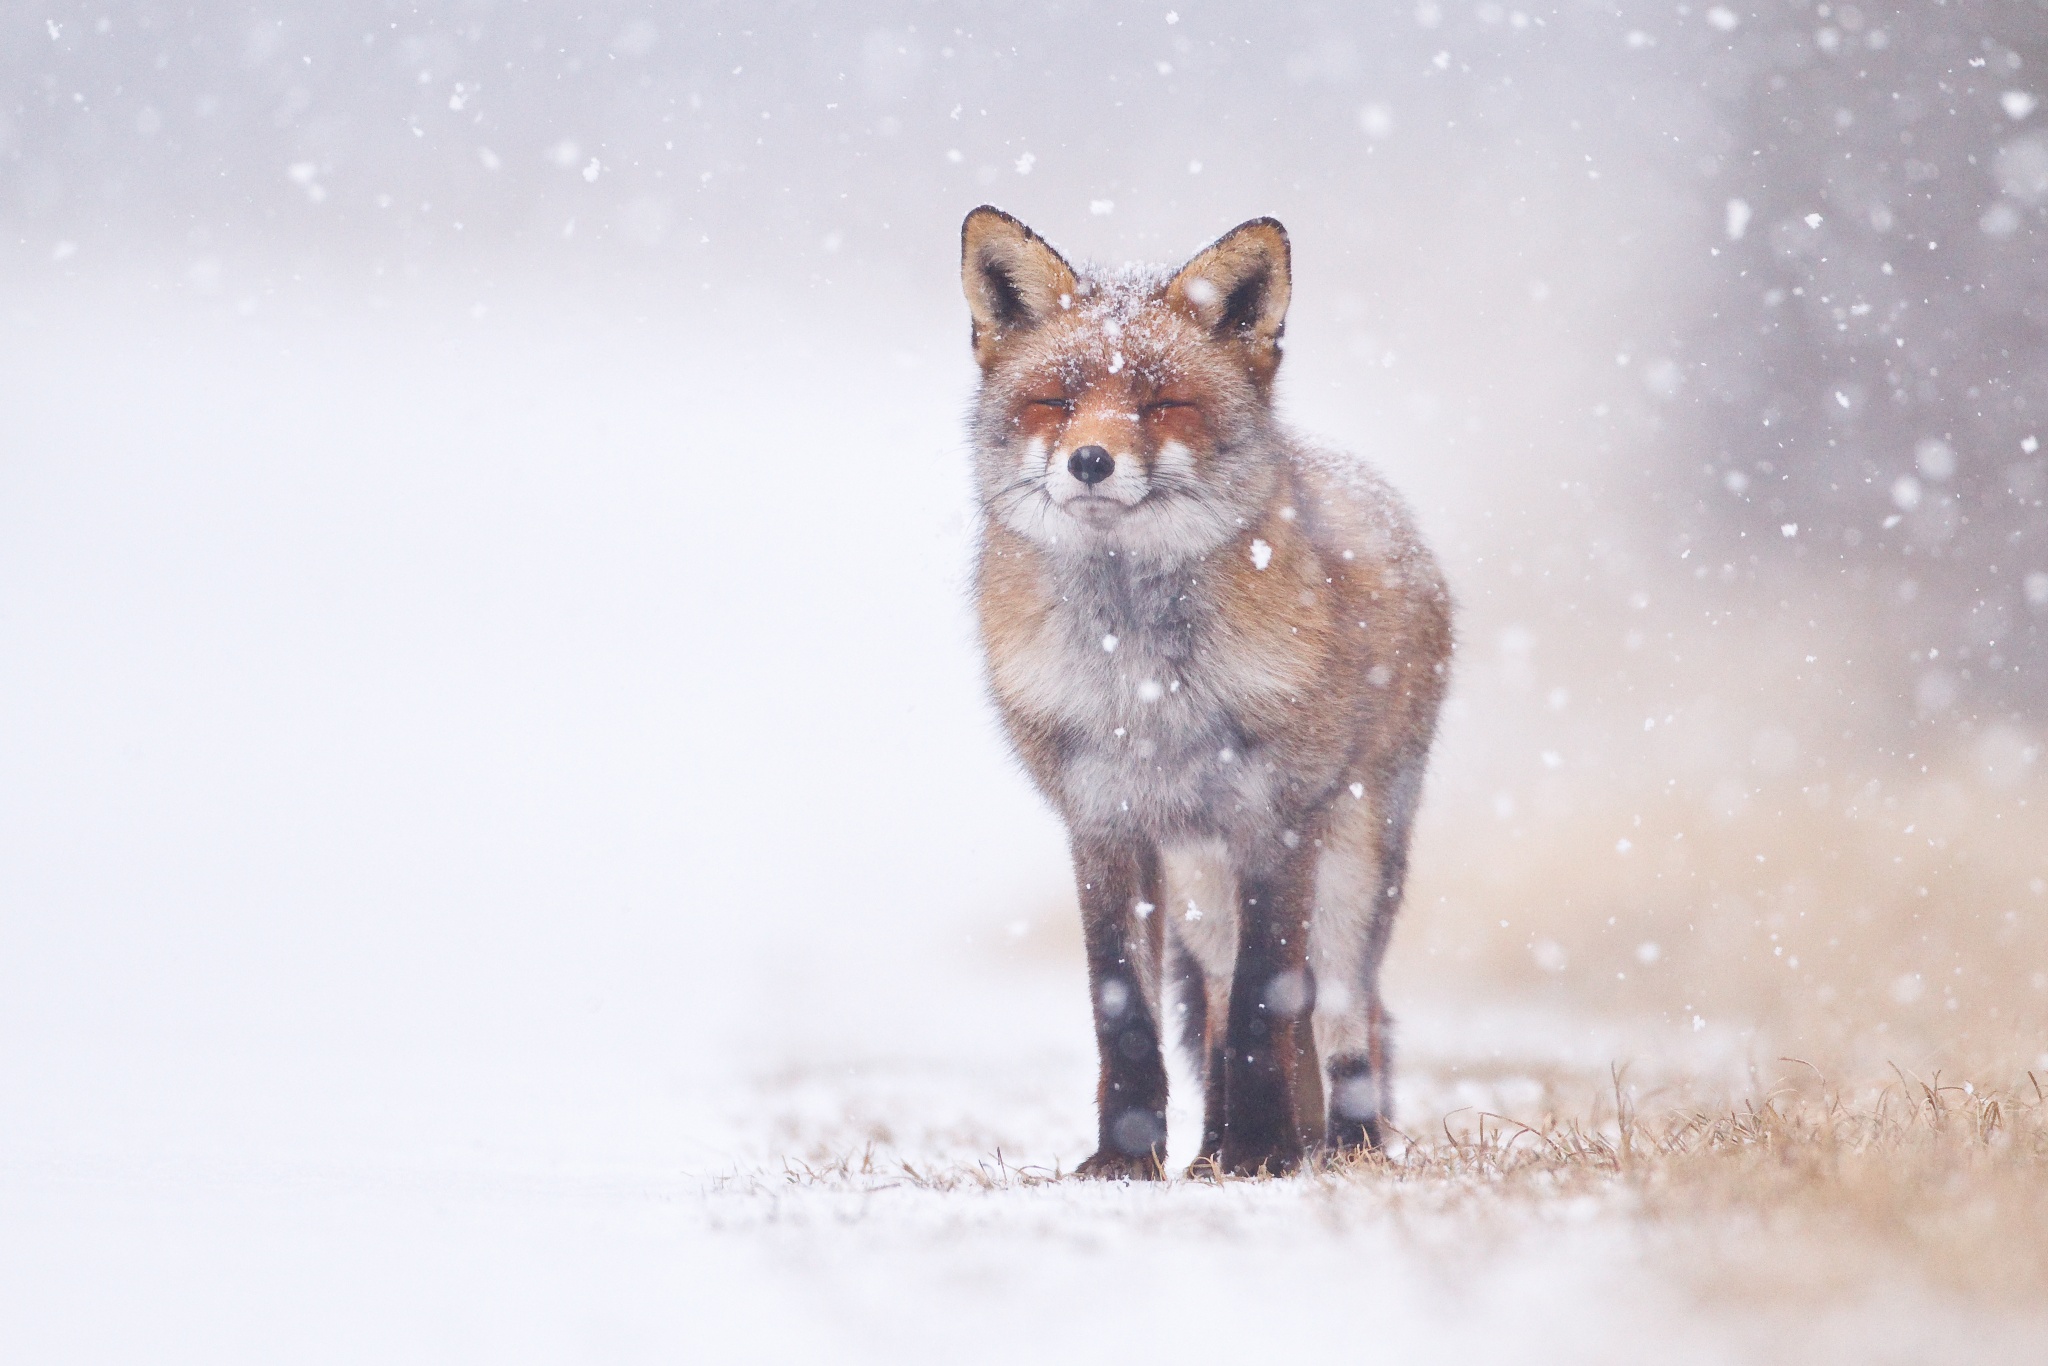 30 Adorable Photos Of Foxes In The Snow